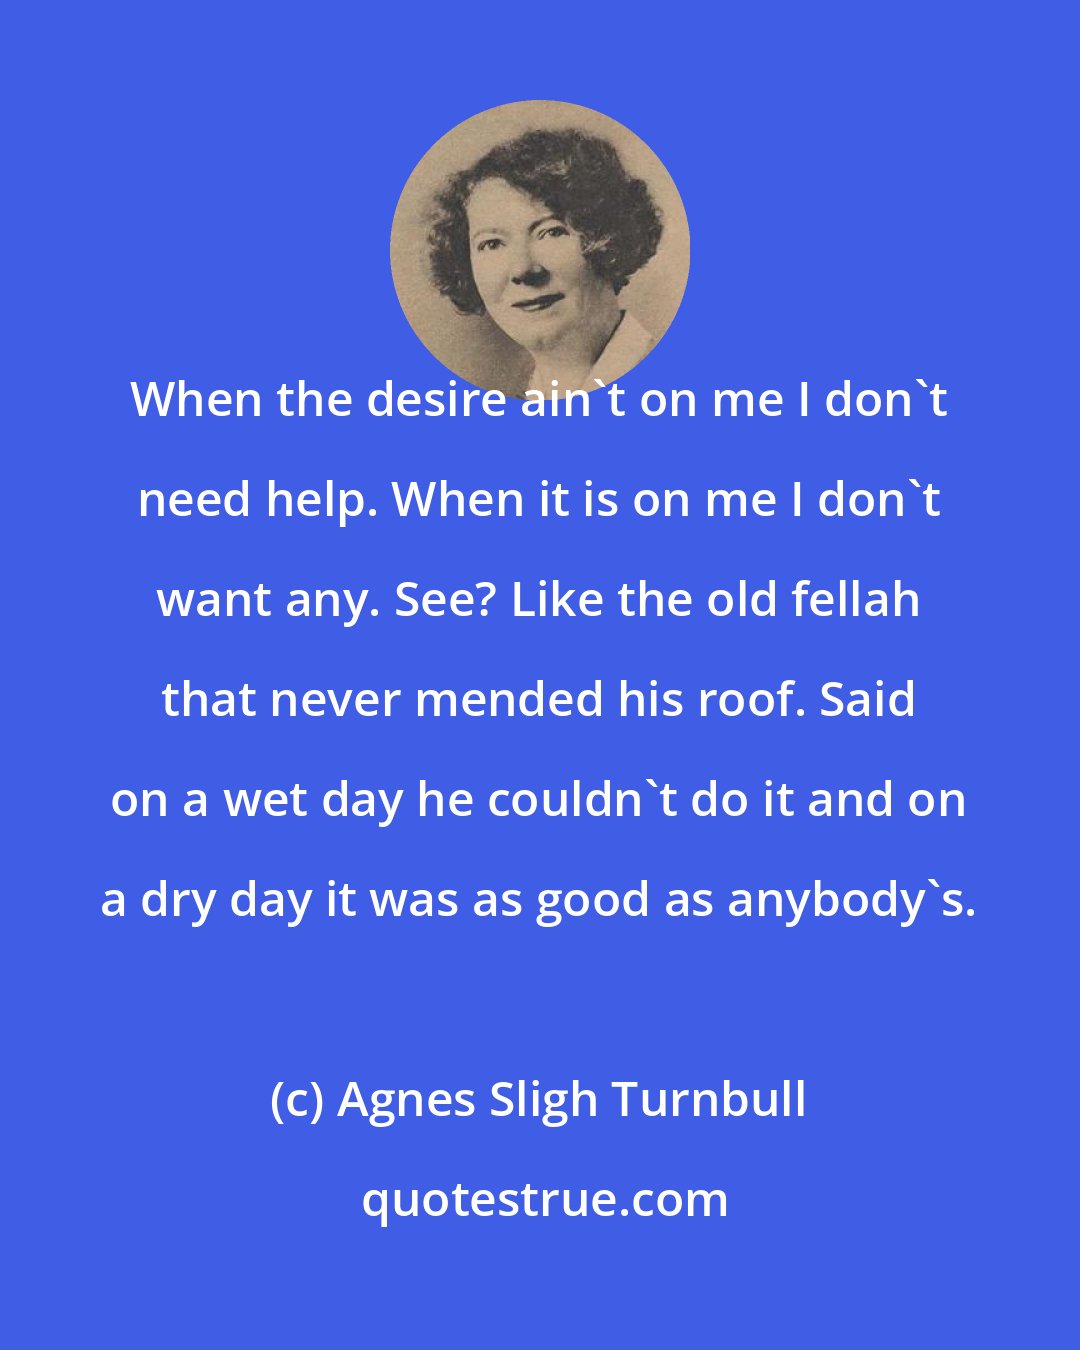 Agnes Sligh Turnbull: When the desire ain't on me I don't need help. When it is on me I don't want any. See? Like the old fellah that never mended his roof. Said on a wet day he couldn't do it and on a dry day it was as good as anybody's.